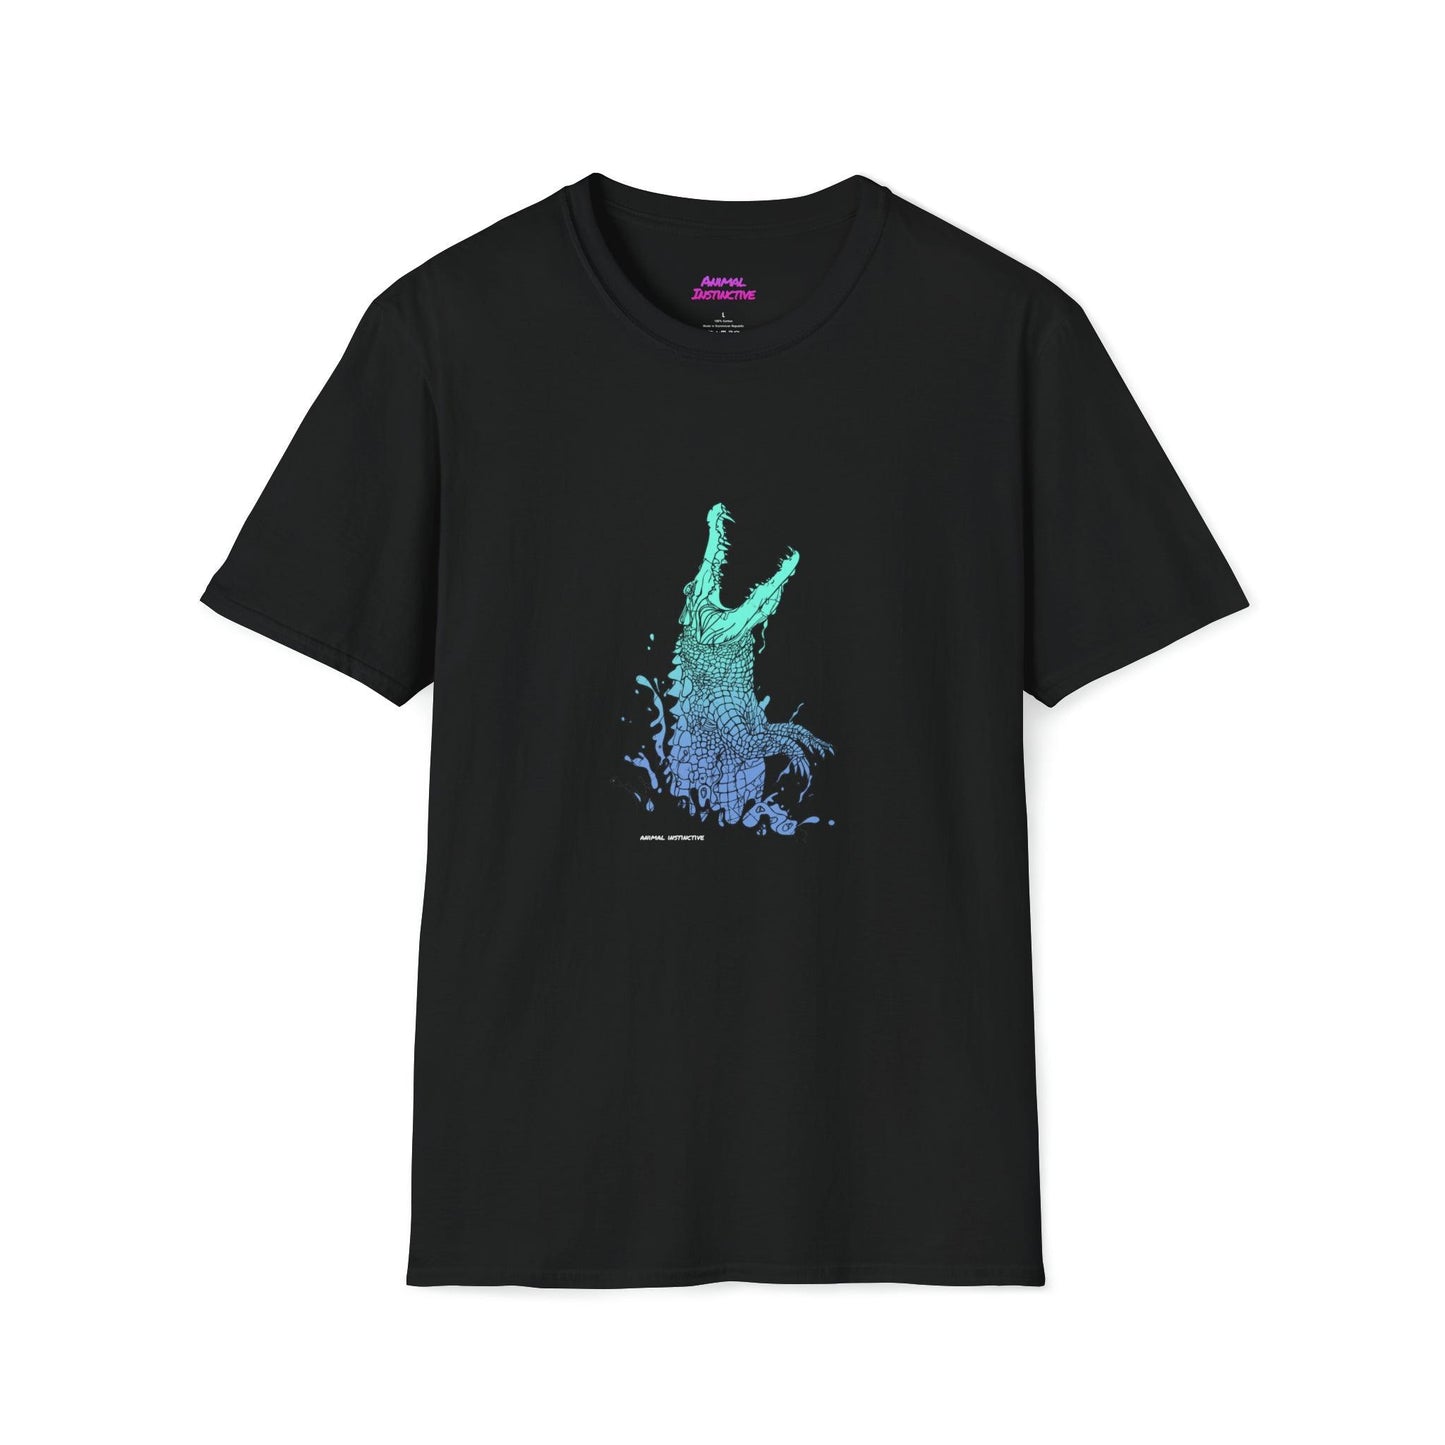 Croc Attack! A multicolor nebula green to blue gradient crocodile launches from the water in a splash, animal instinctive apparel at it's finest